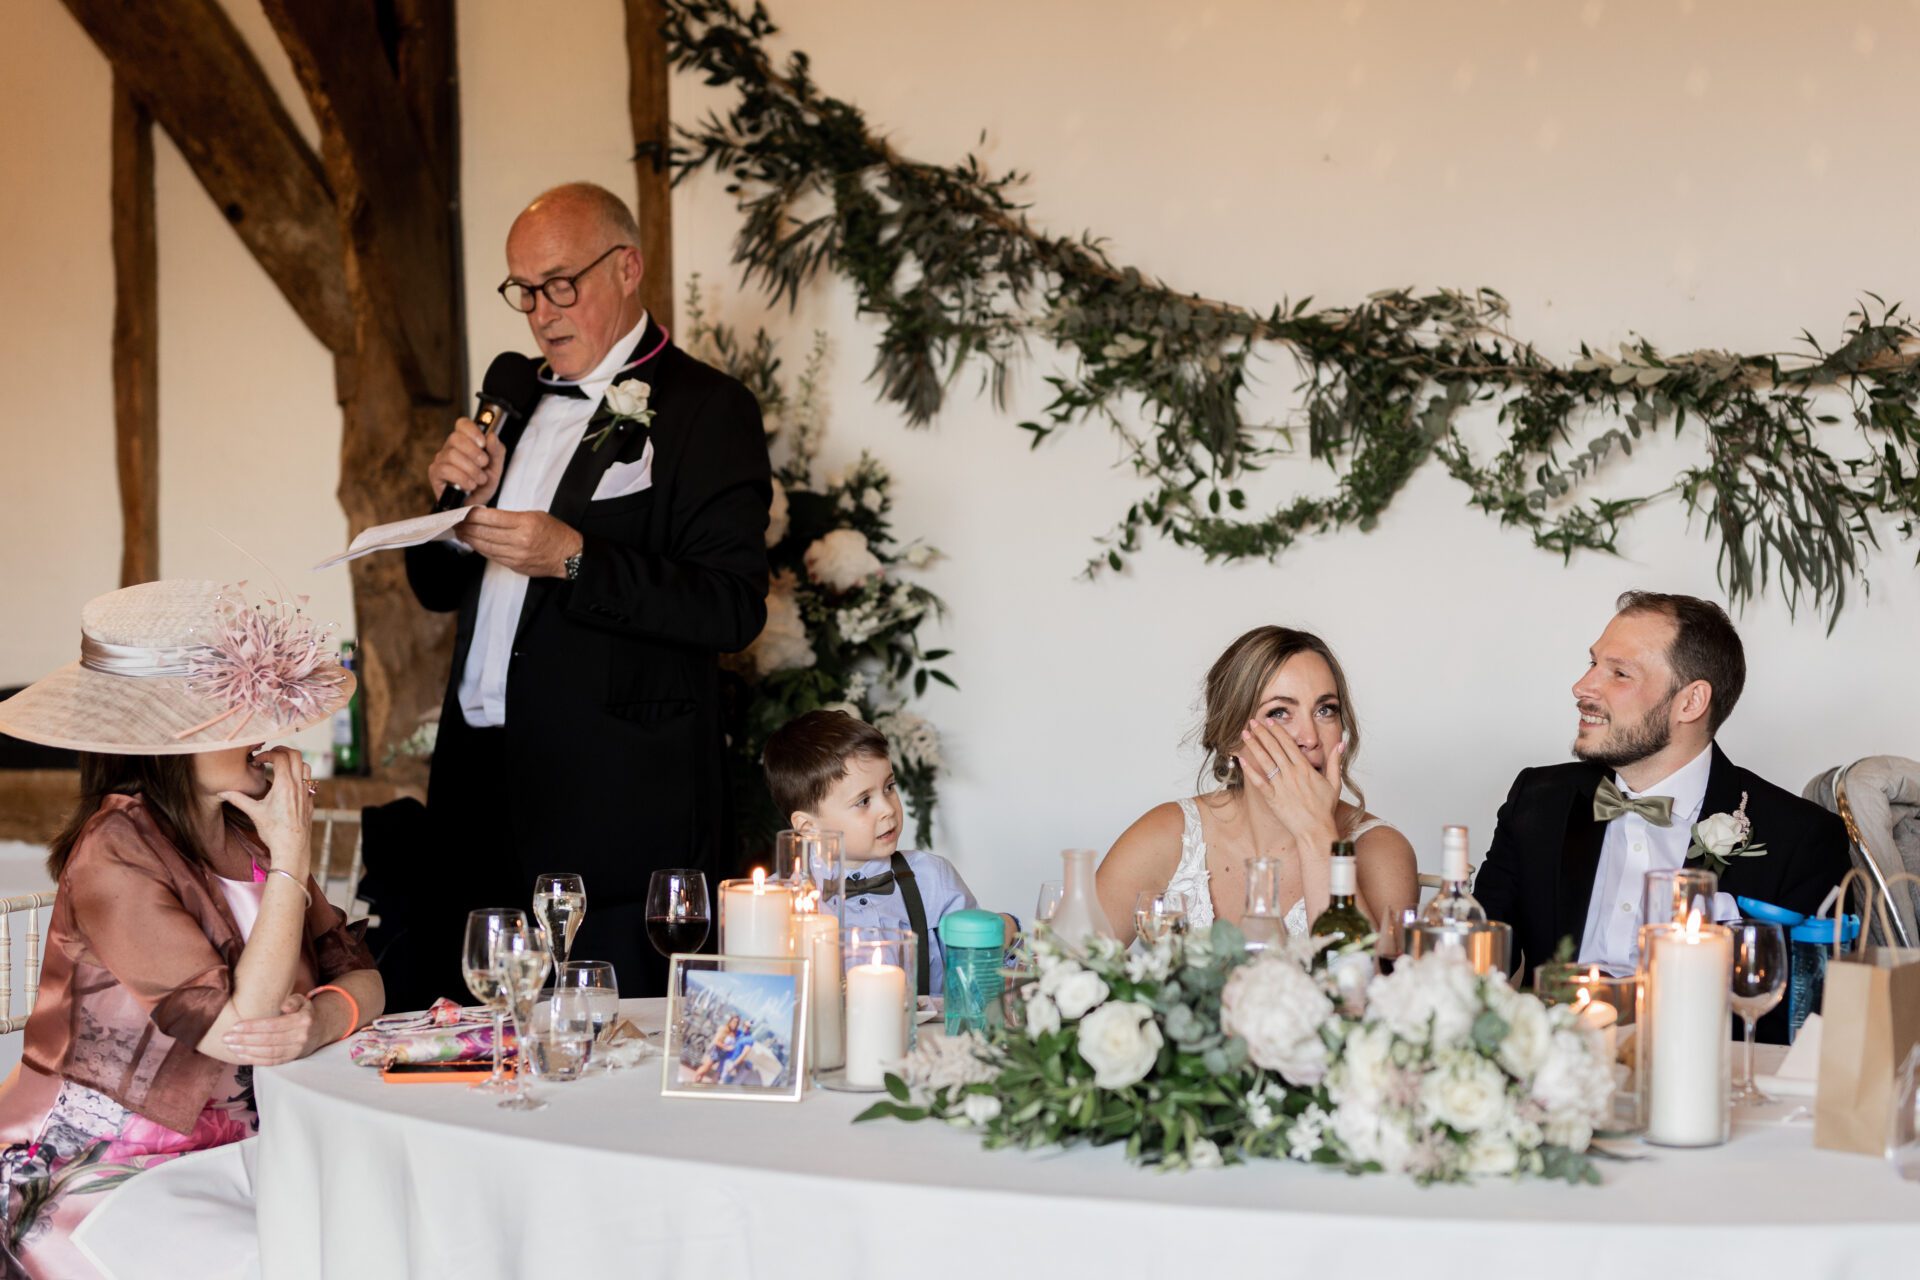 The father of the bride gives a speech at Old Luxters Barn wedding venue in Oxfordshire